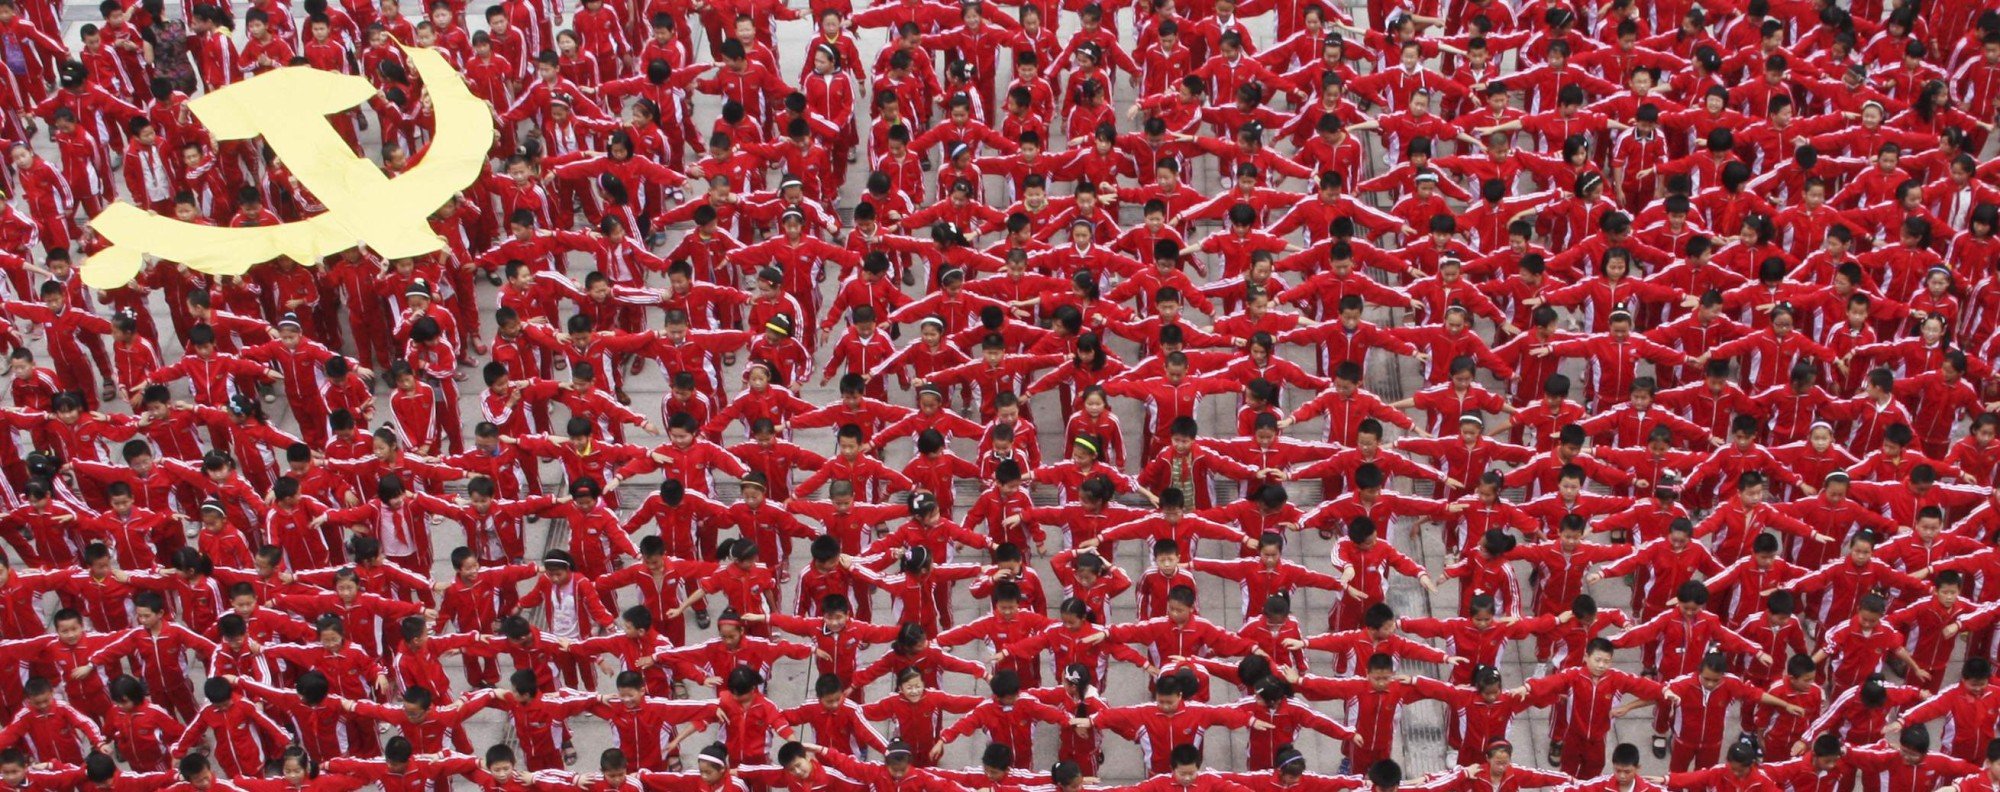 Students in school uniforms link their arms to form the flag of the Communist Party of China, in celebration of the party's upcoming 90th anniversary in July 2011. Photo: Reuters/China Daily 